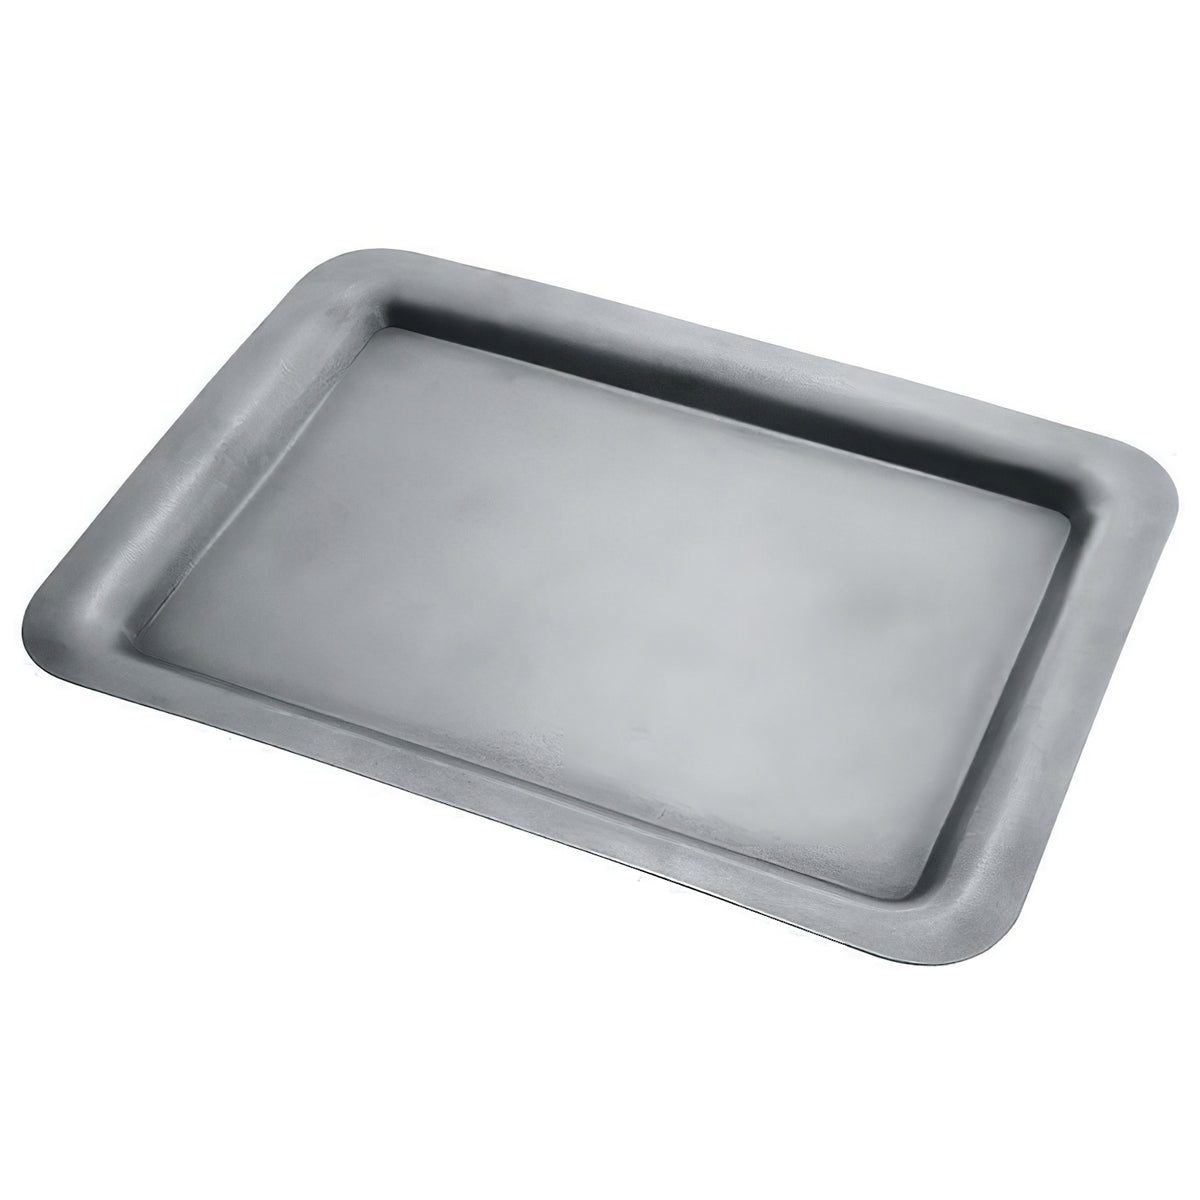 AOYOSHI VINTAGE Stainless Steel Serving Tray